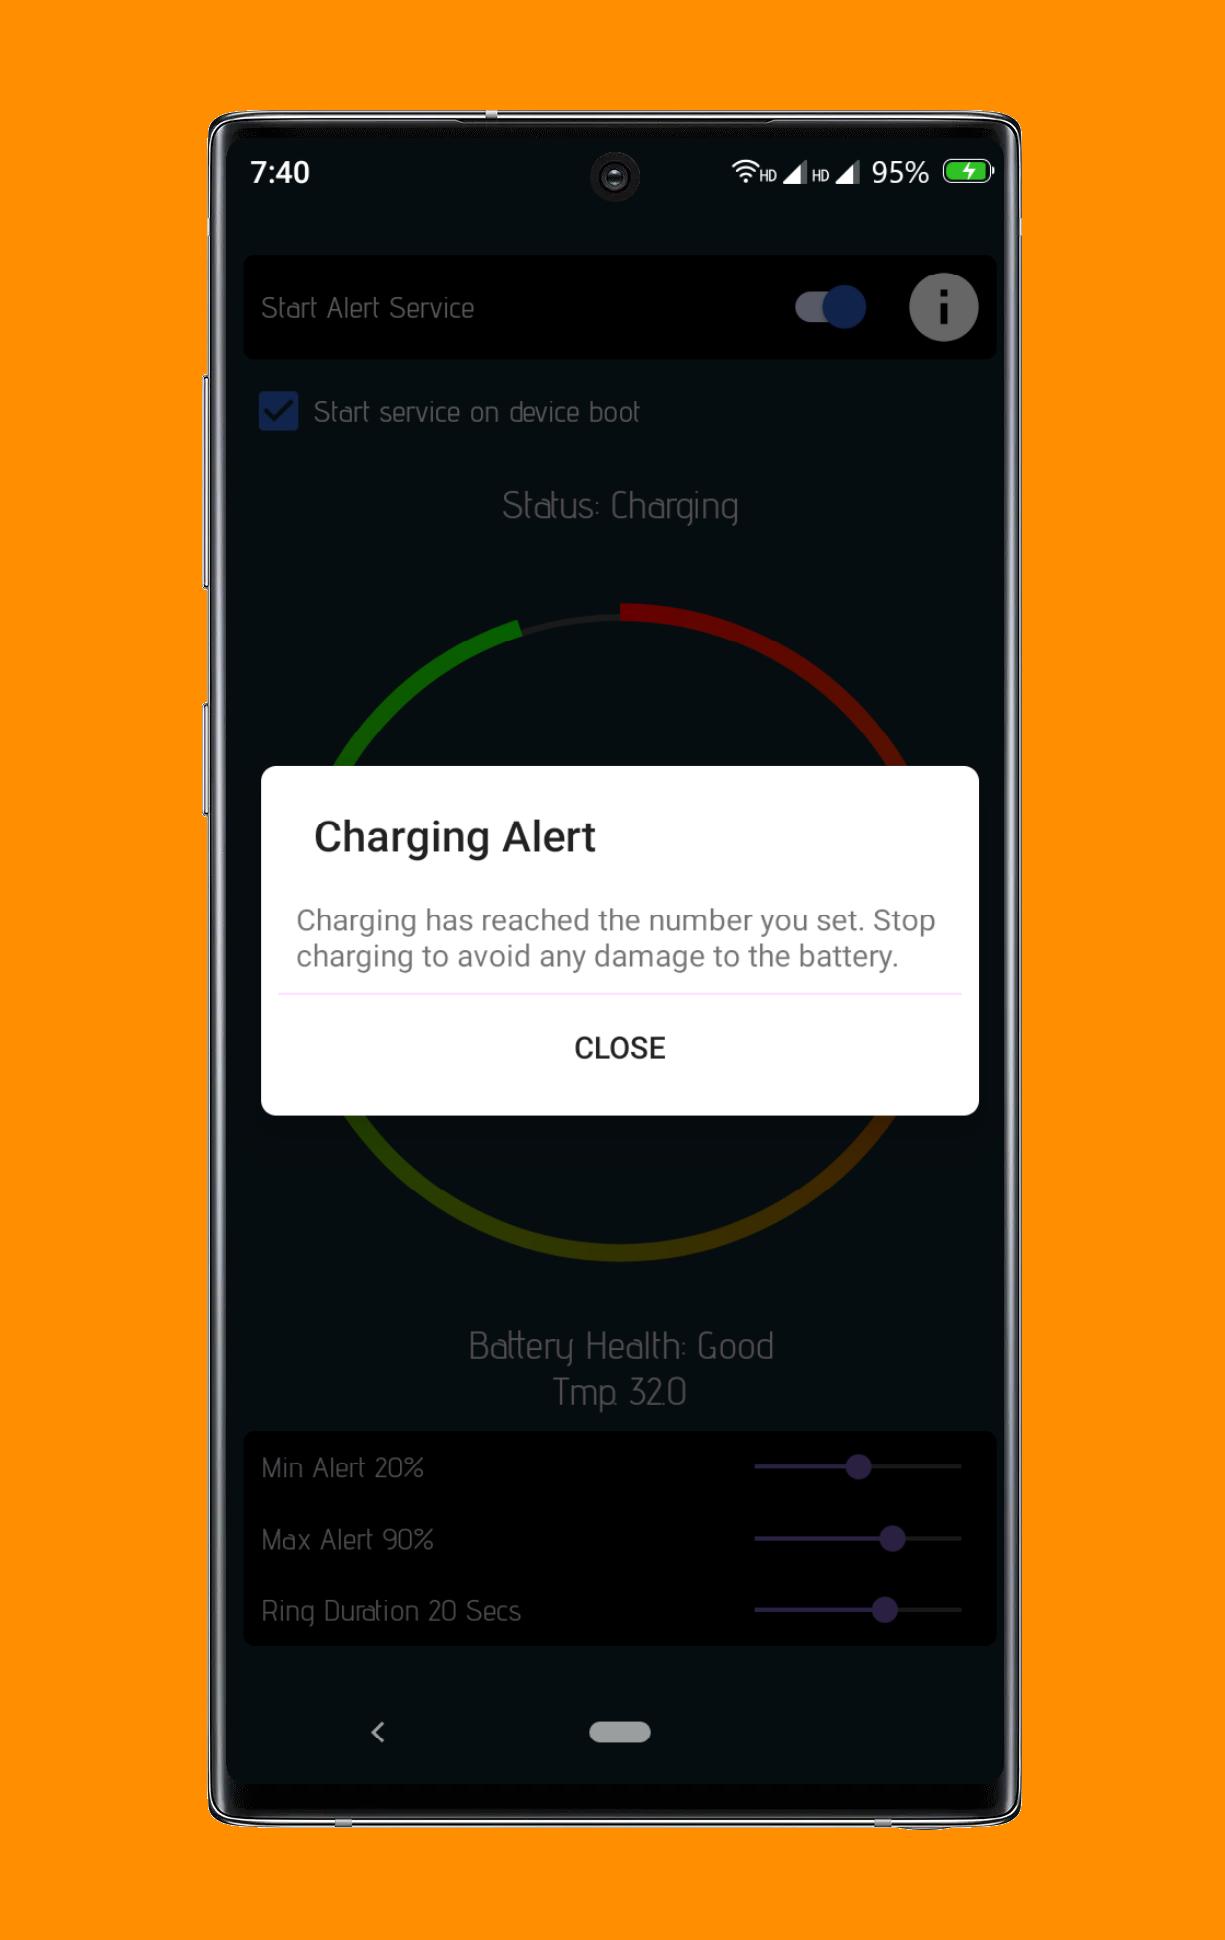 Charger Alert (Battery Health). Subscription Tracker.